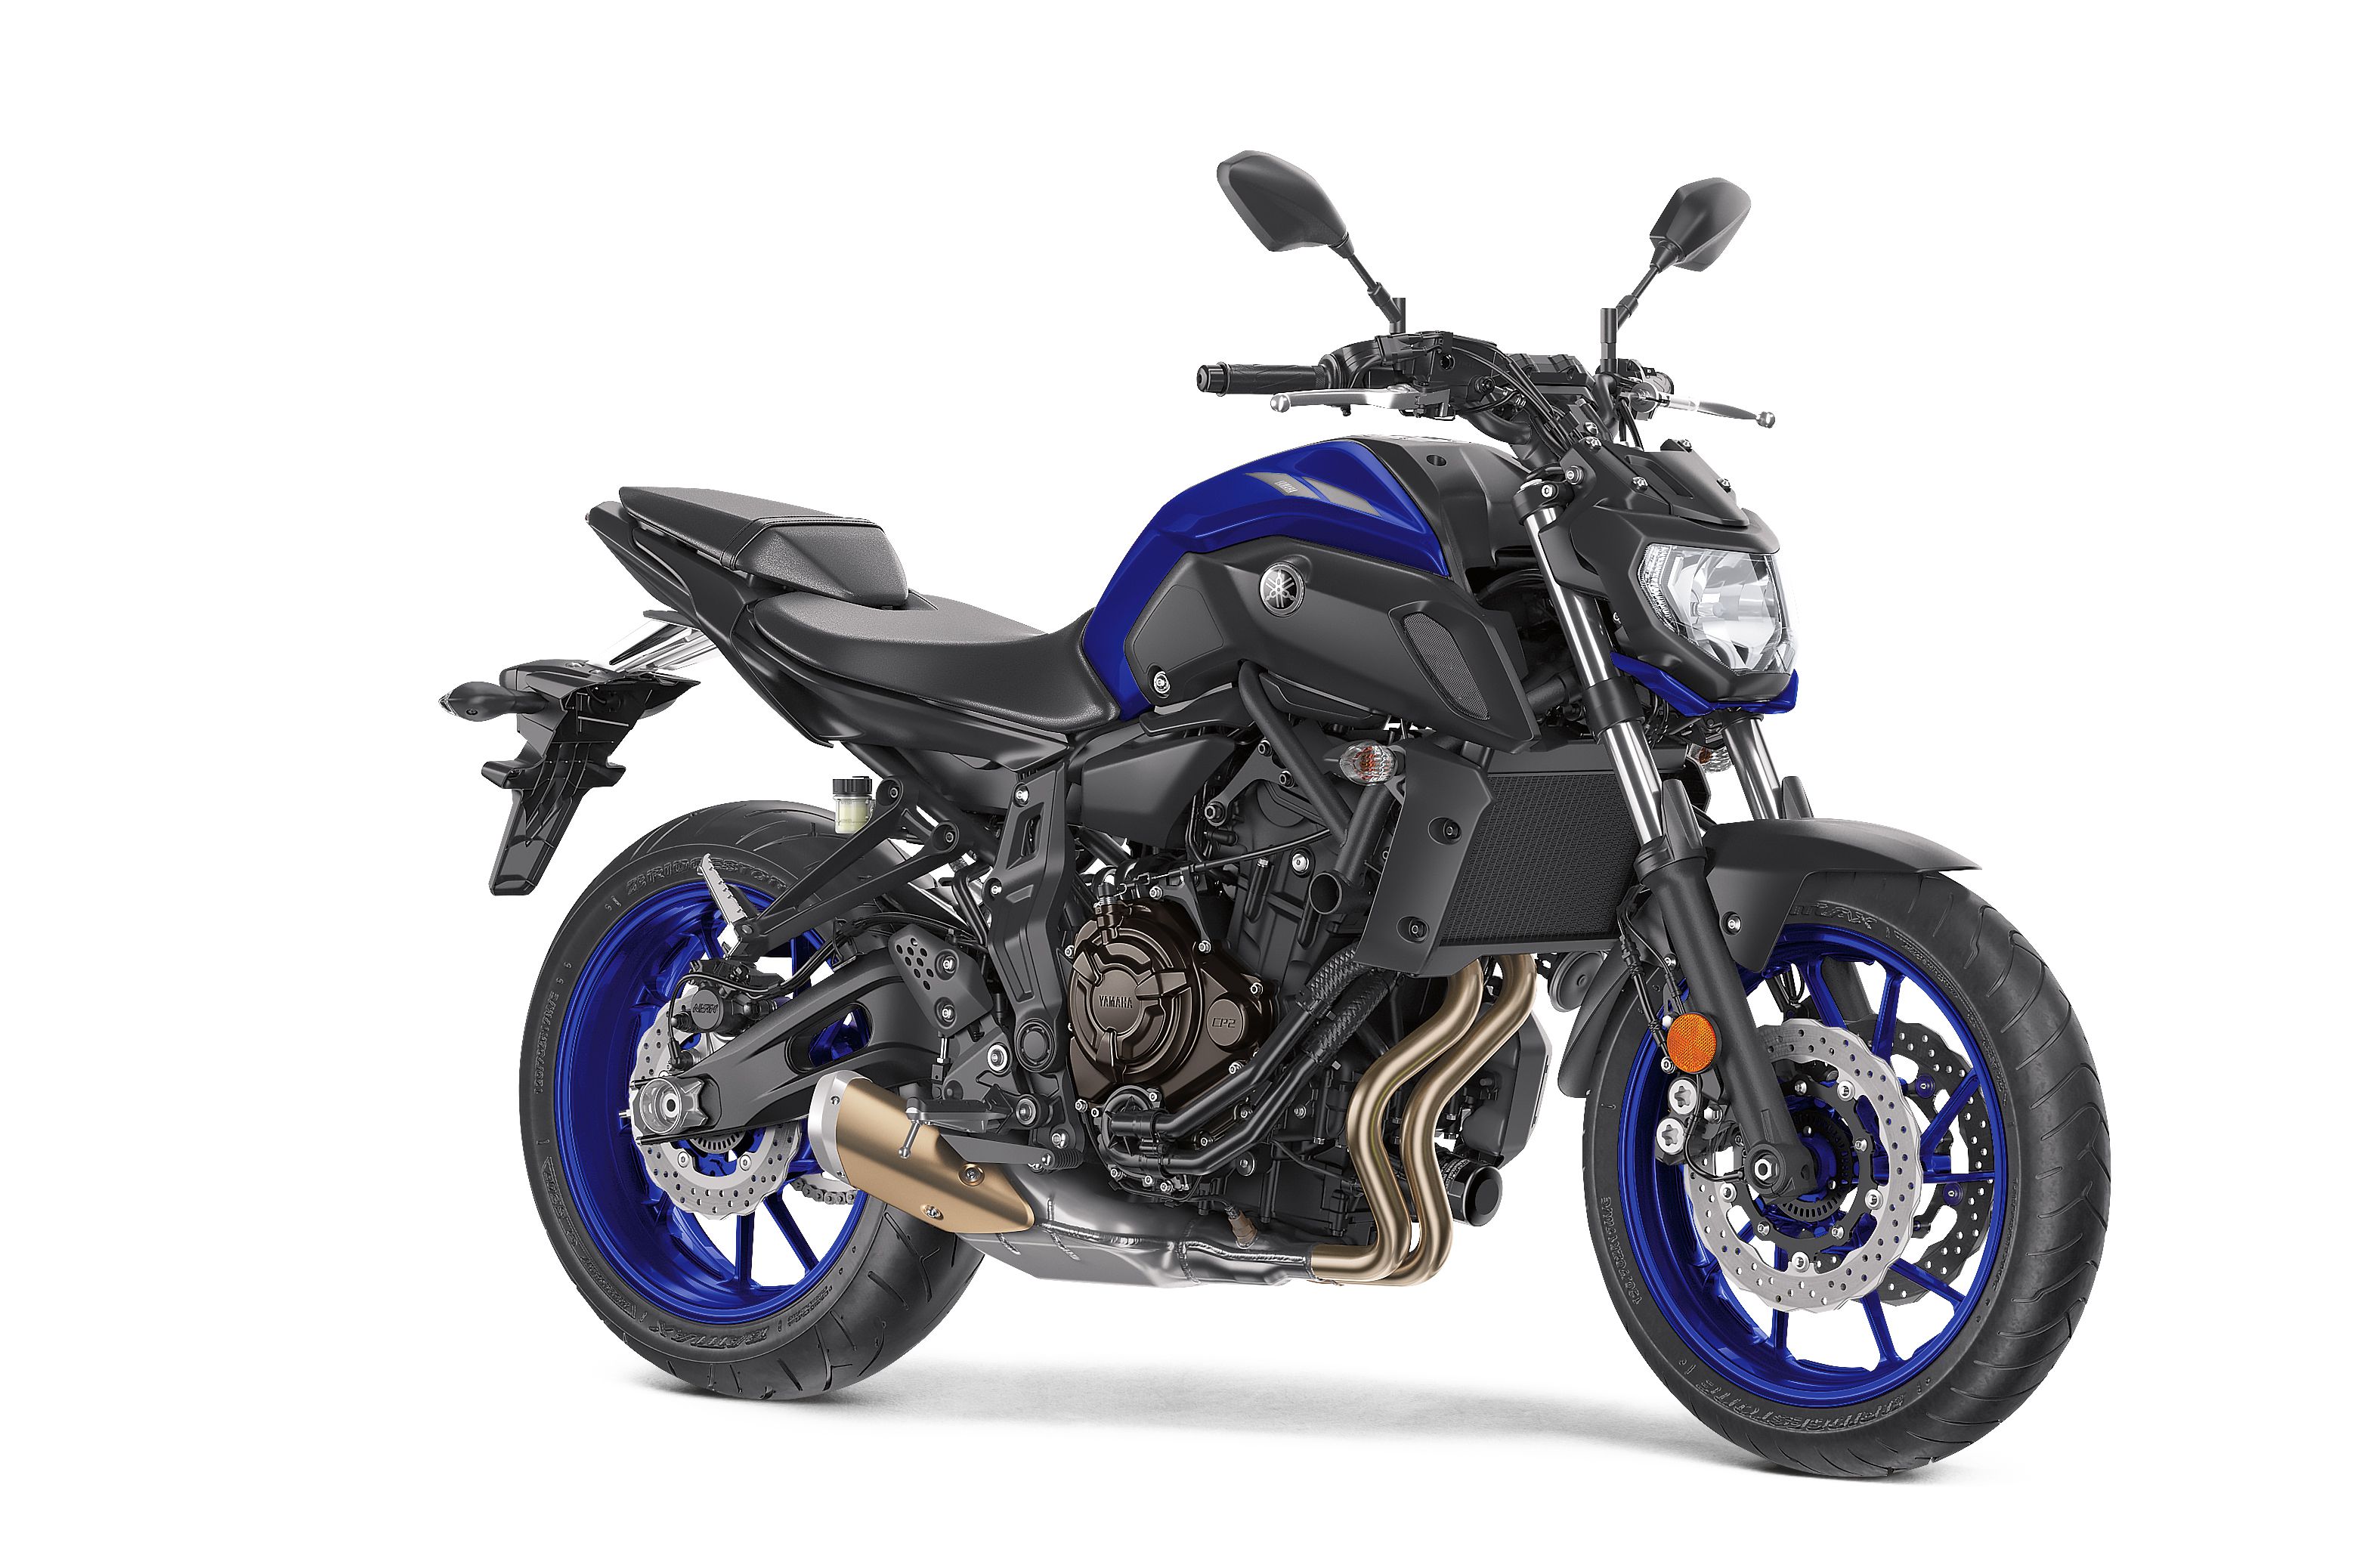 The 2018 Yamaha Mt 07 Is An Fz 07 With A Euro Name And A Few Other Updates Cycle World